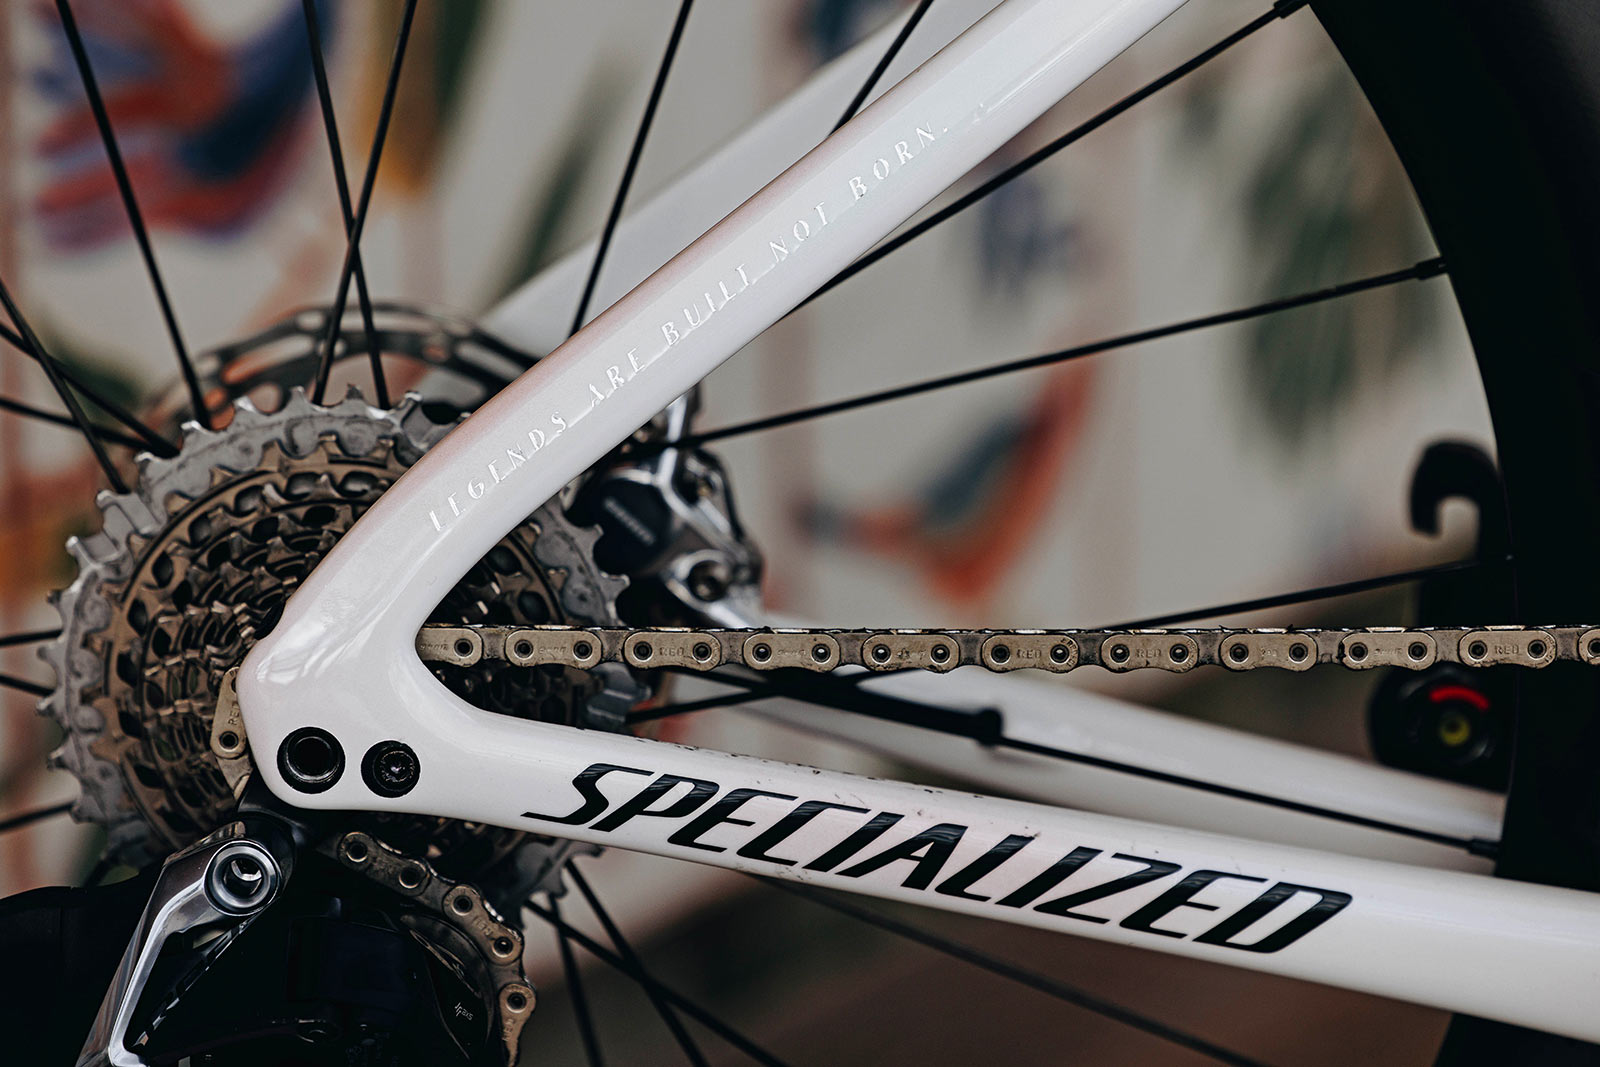 S-Works World Champ Tarmac SL7 of Niamh Fischer-Black, motivational quotes